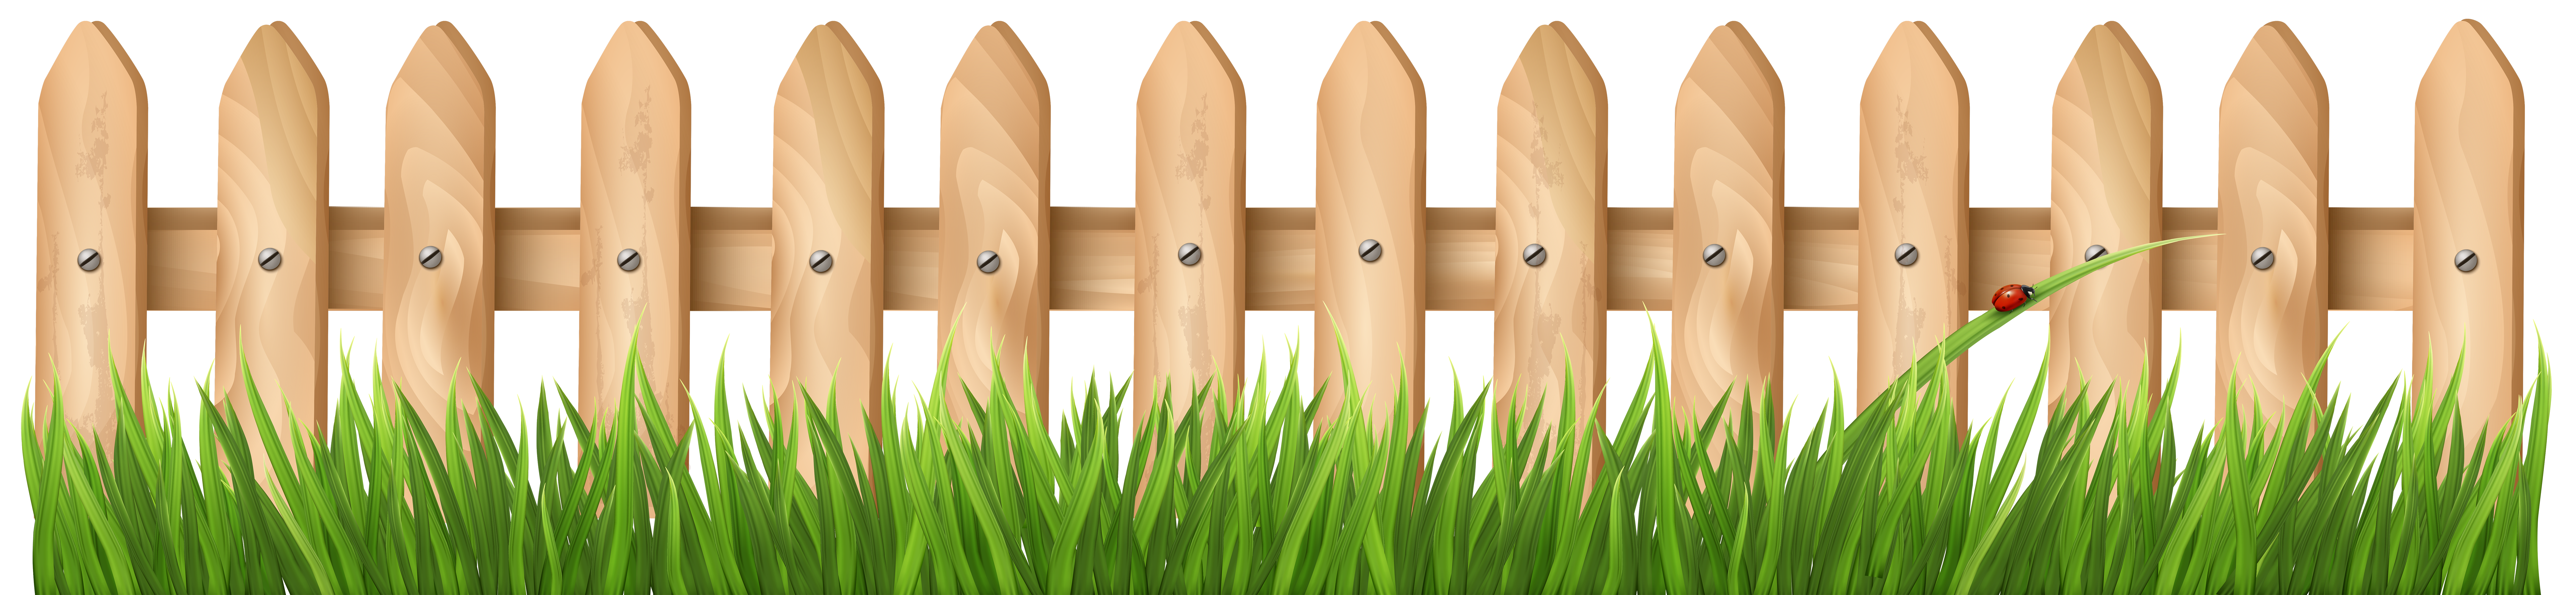 Garden clipart fence.  collection of with